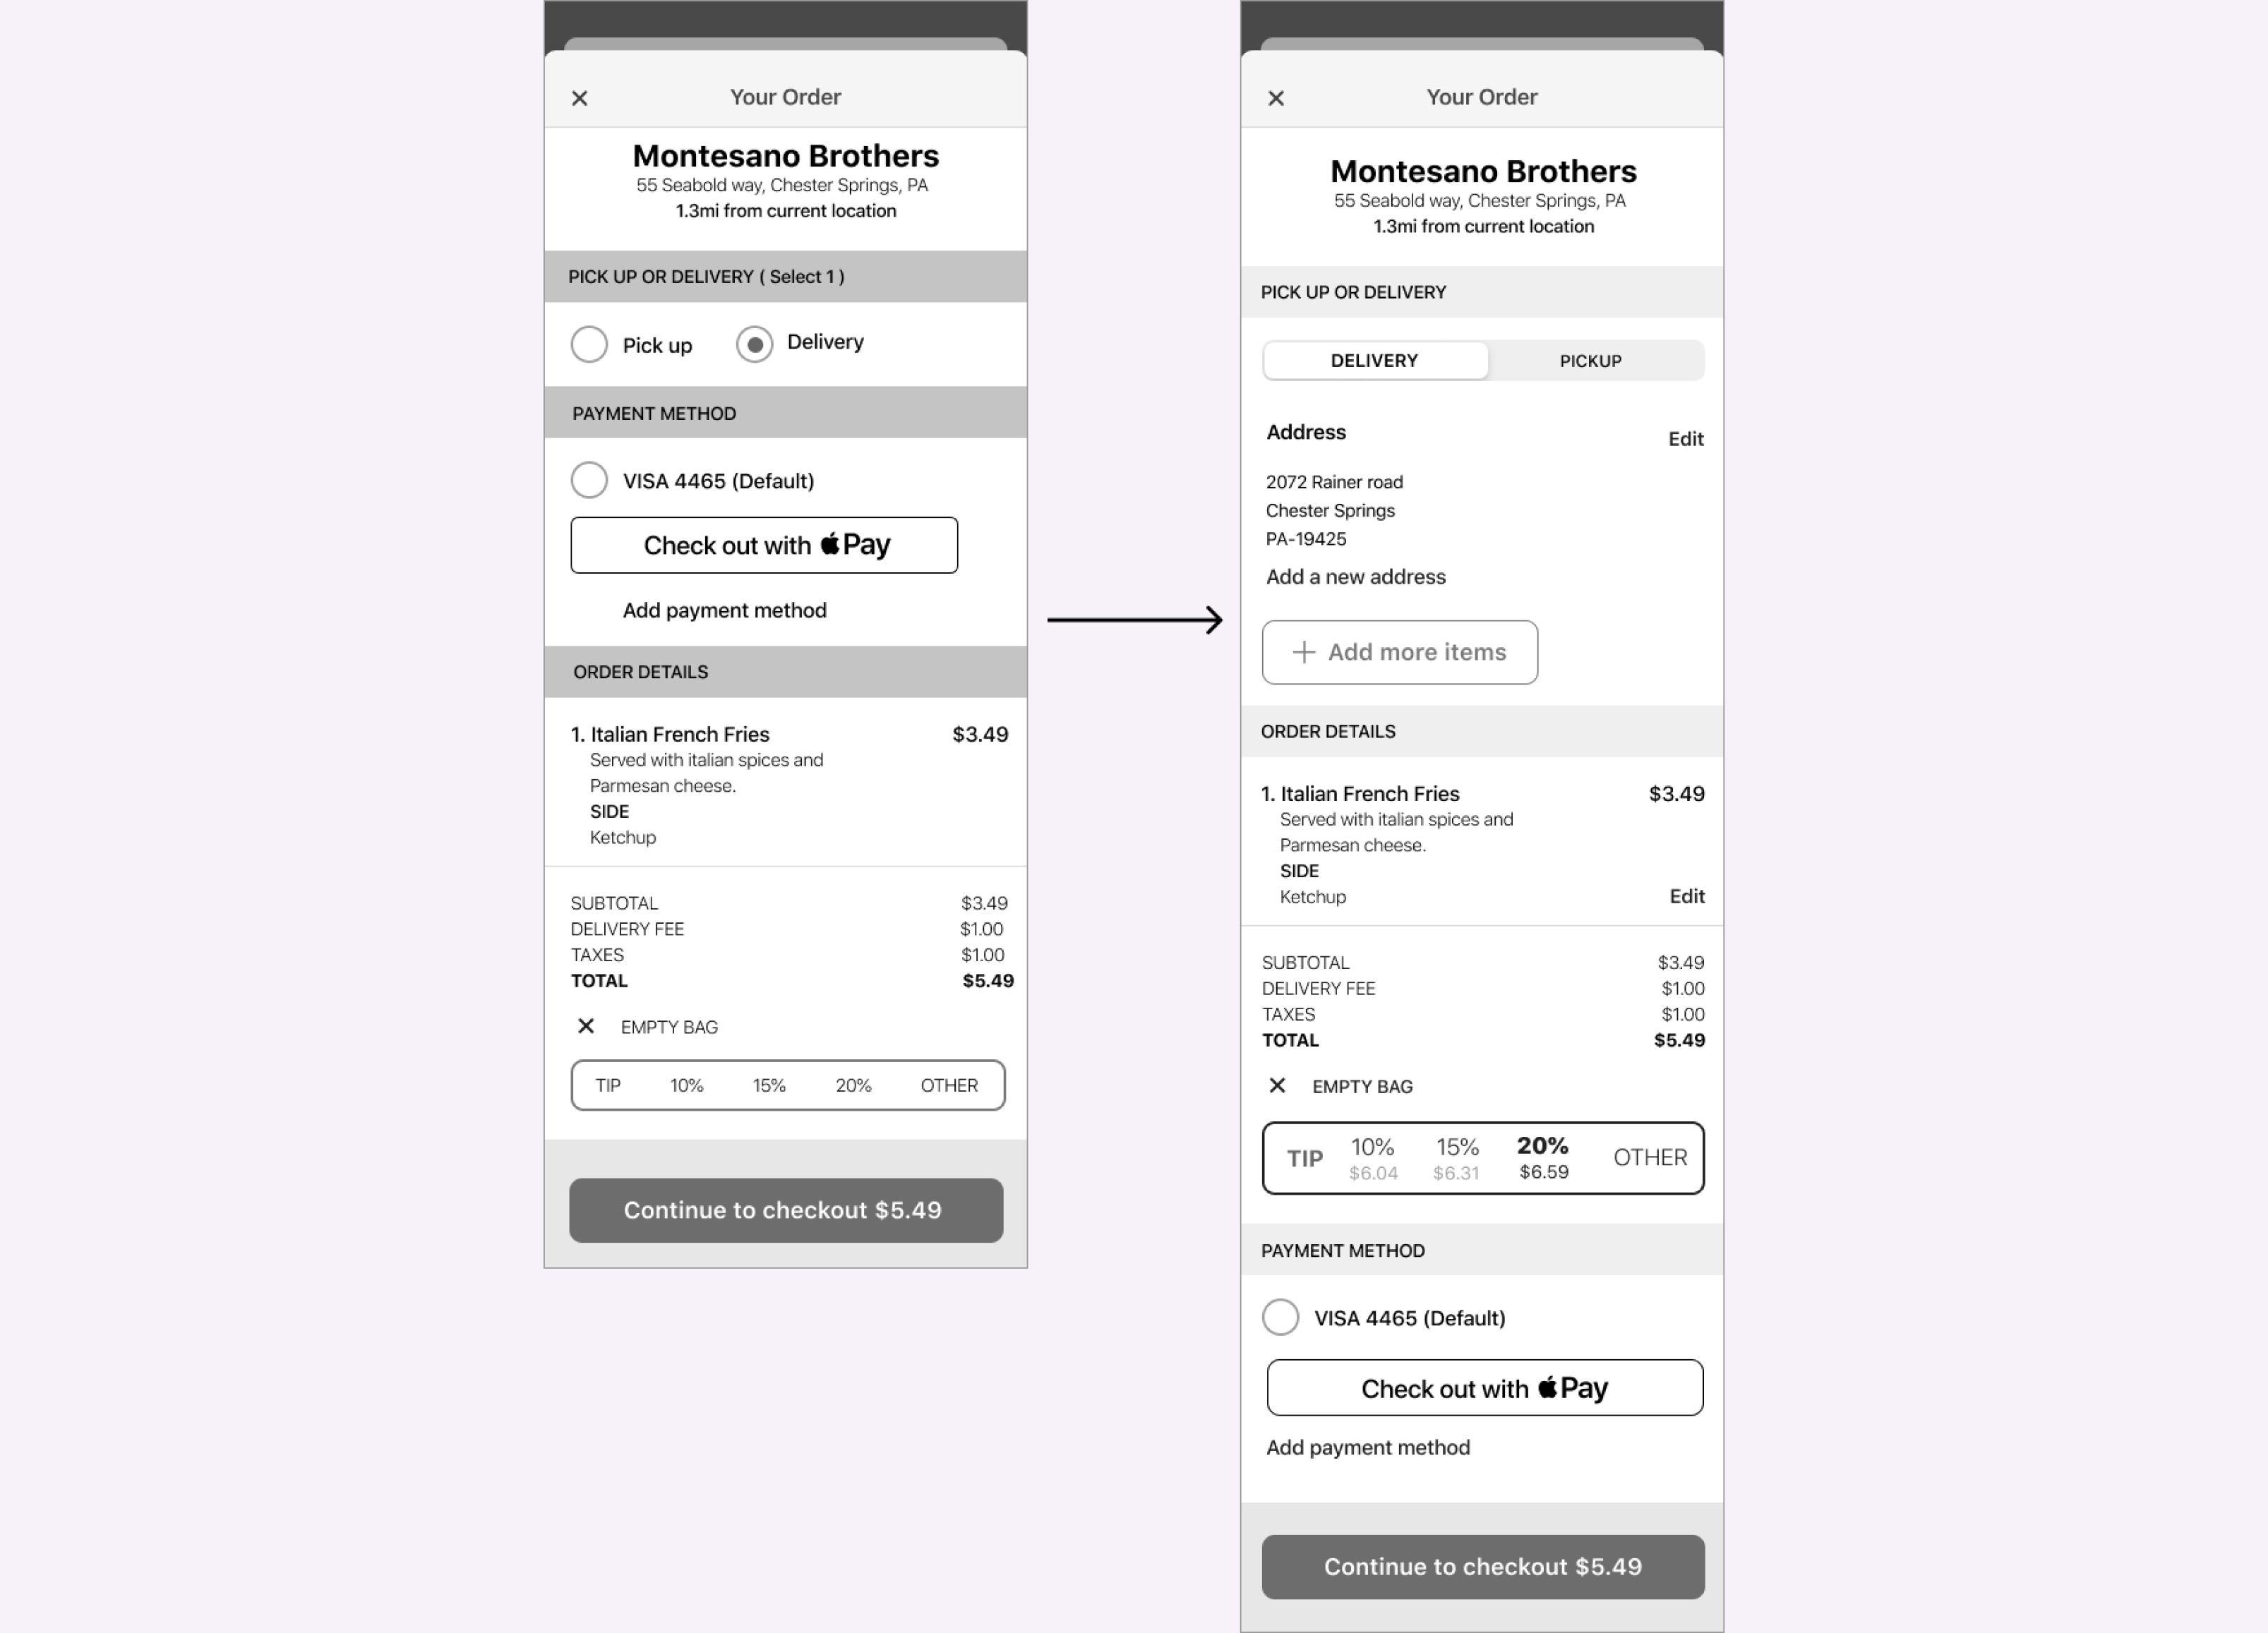 Wireframe showing the initial order review page and the
                 iterated page where the edit option has been added for the users.